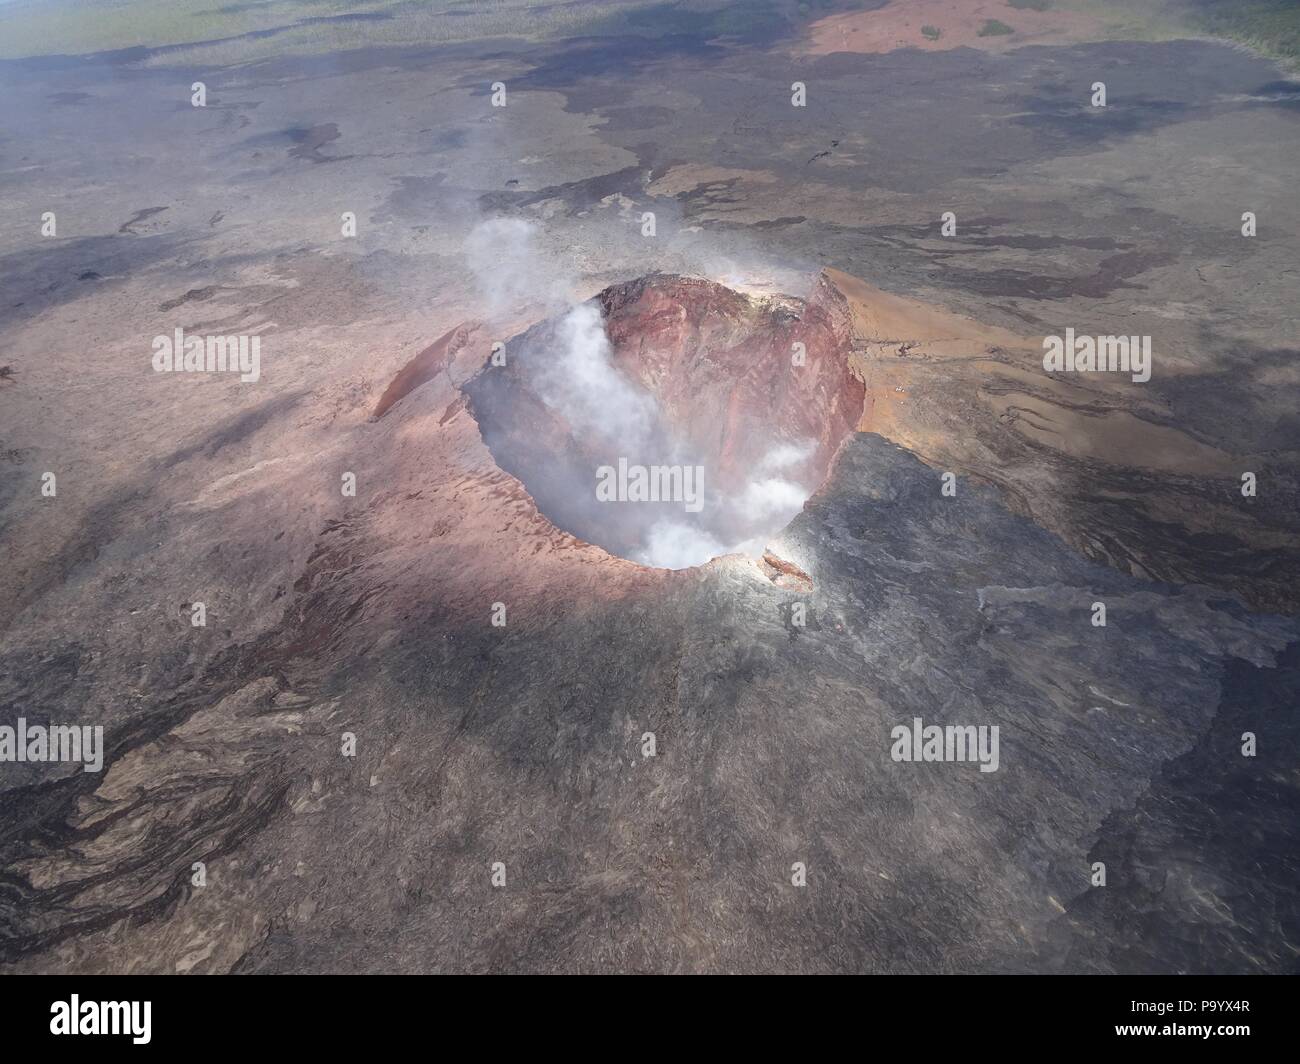 Aerial photo of Halemaumau and part of the Kilauea caldera floor at the summit as the volcano continues to erupt July 17, 2018 in Hawaii. In the lower third of the image, you can see the buildings that housed the USGS Hawaiian Volcano Observatory and Hawaii Volcanoes National Park Jaggar Museum. Stock Photo